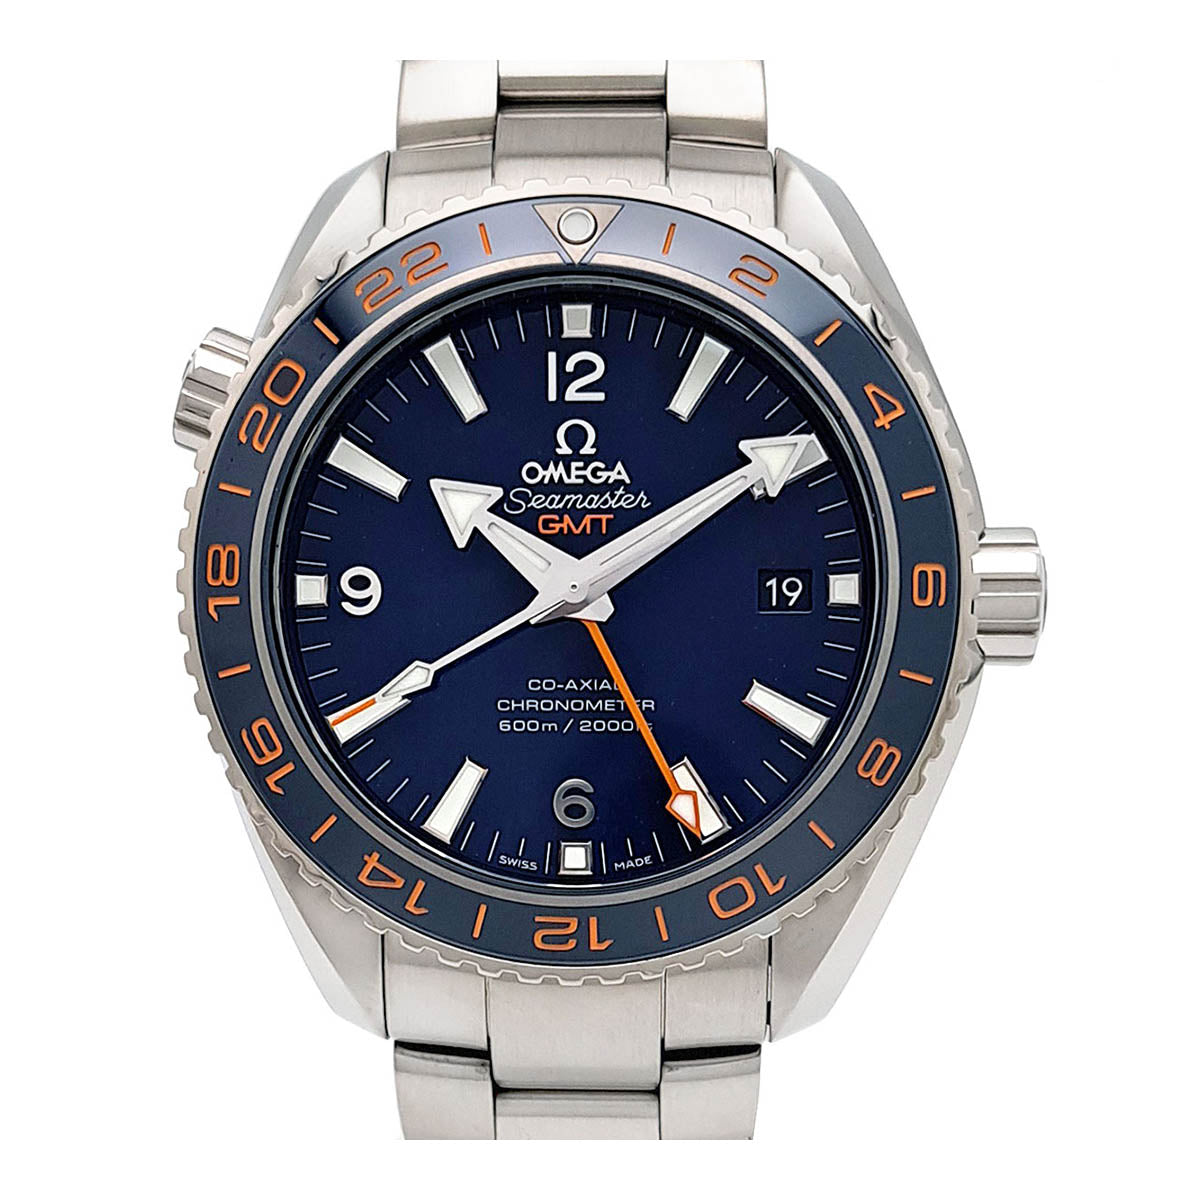 OMEGA Planet Ocean Goodplanet GMT 232.30.44.22.03.001 Automatic Stainless Steel Men's Watch [Used] 232.30.44.22.03.001